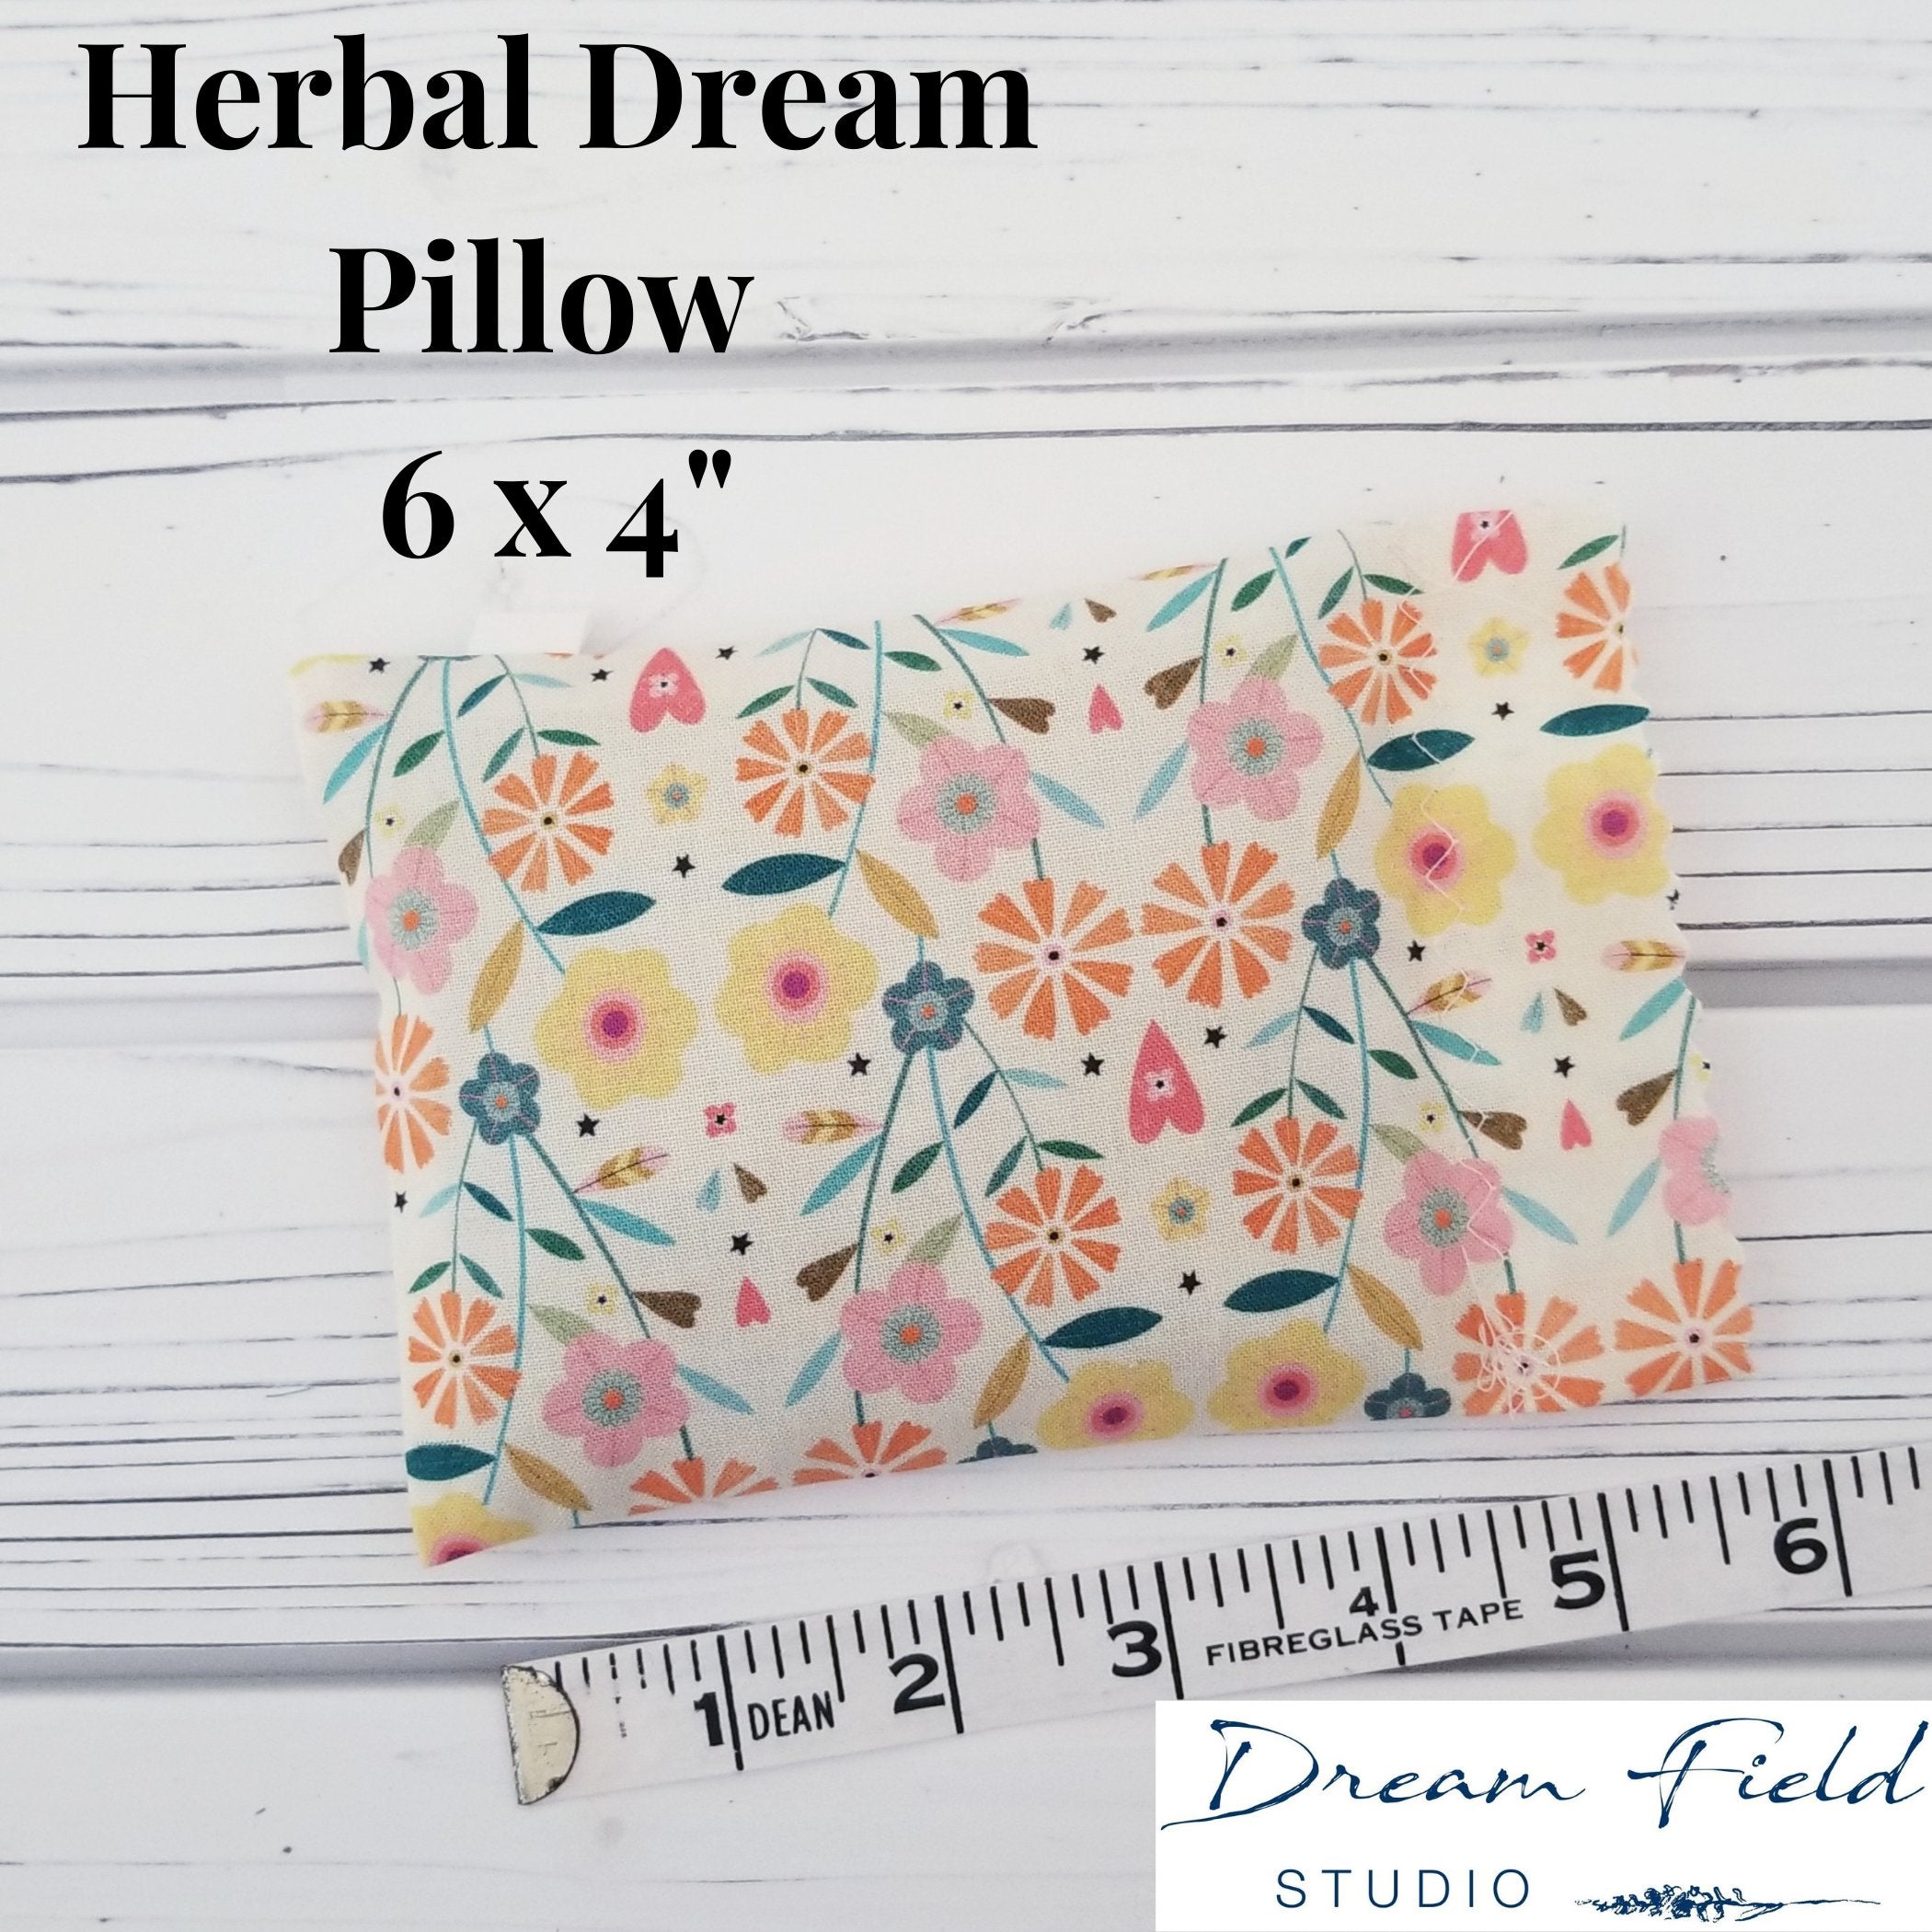 Herbal Sleep and Dream Sachet - Petite Pillow for Natural Sleep and Deeper Dreaming, 6" x 4", Blend of 7 Savory Herbs, Navy Dots on Cotton